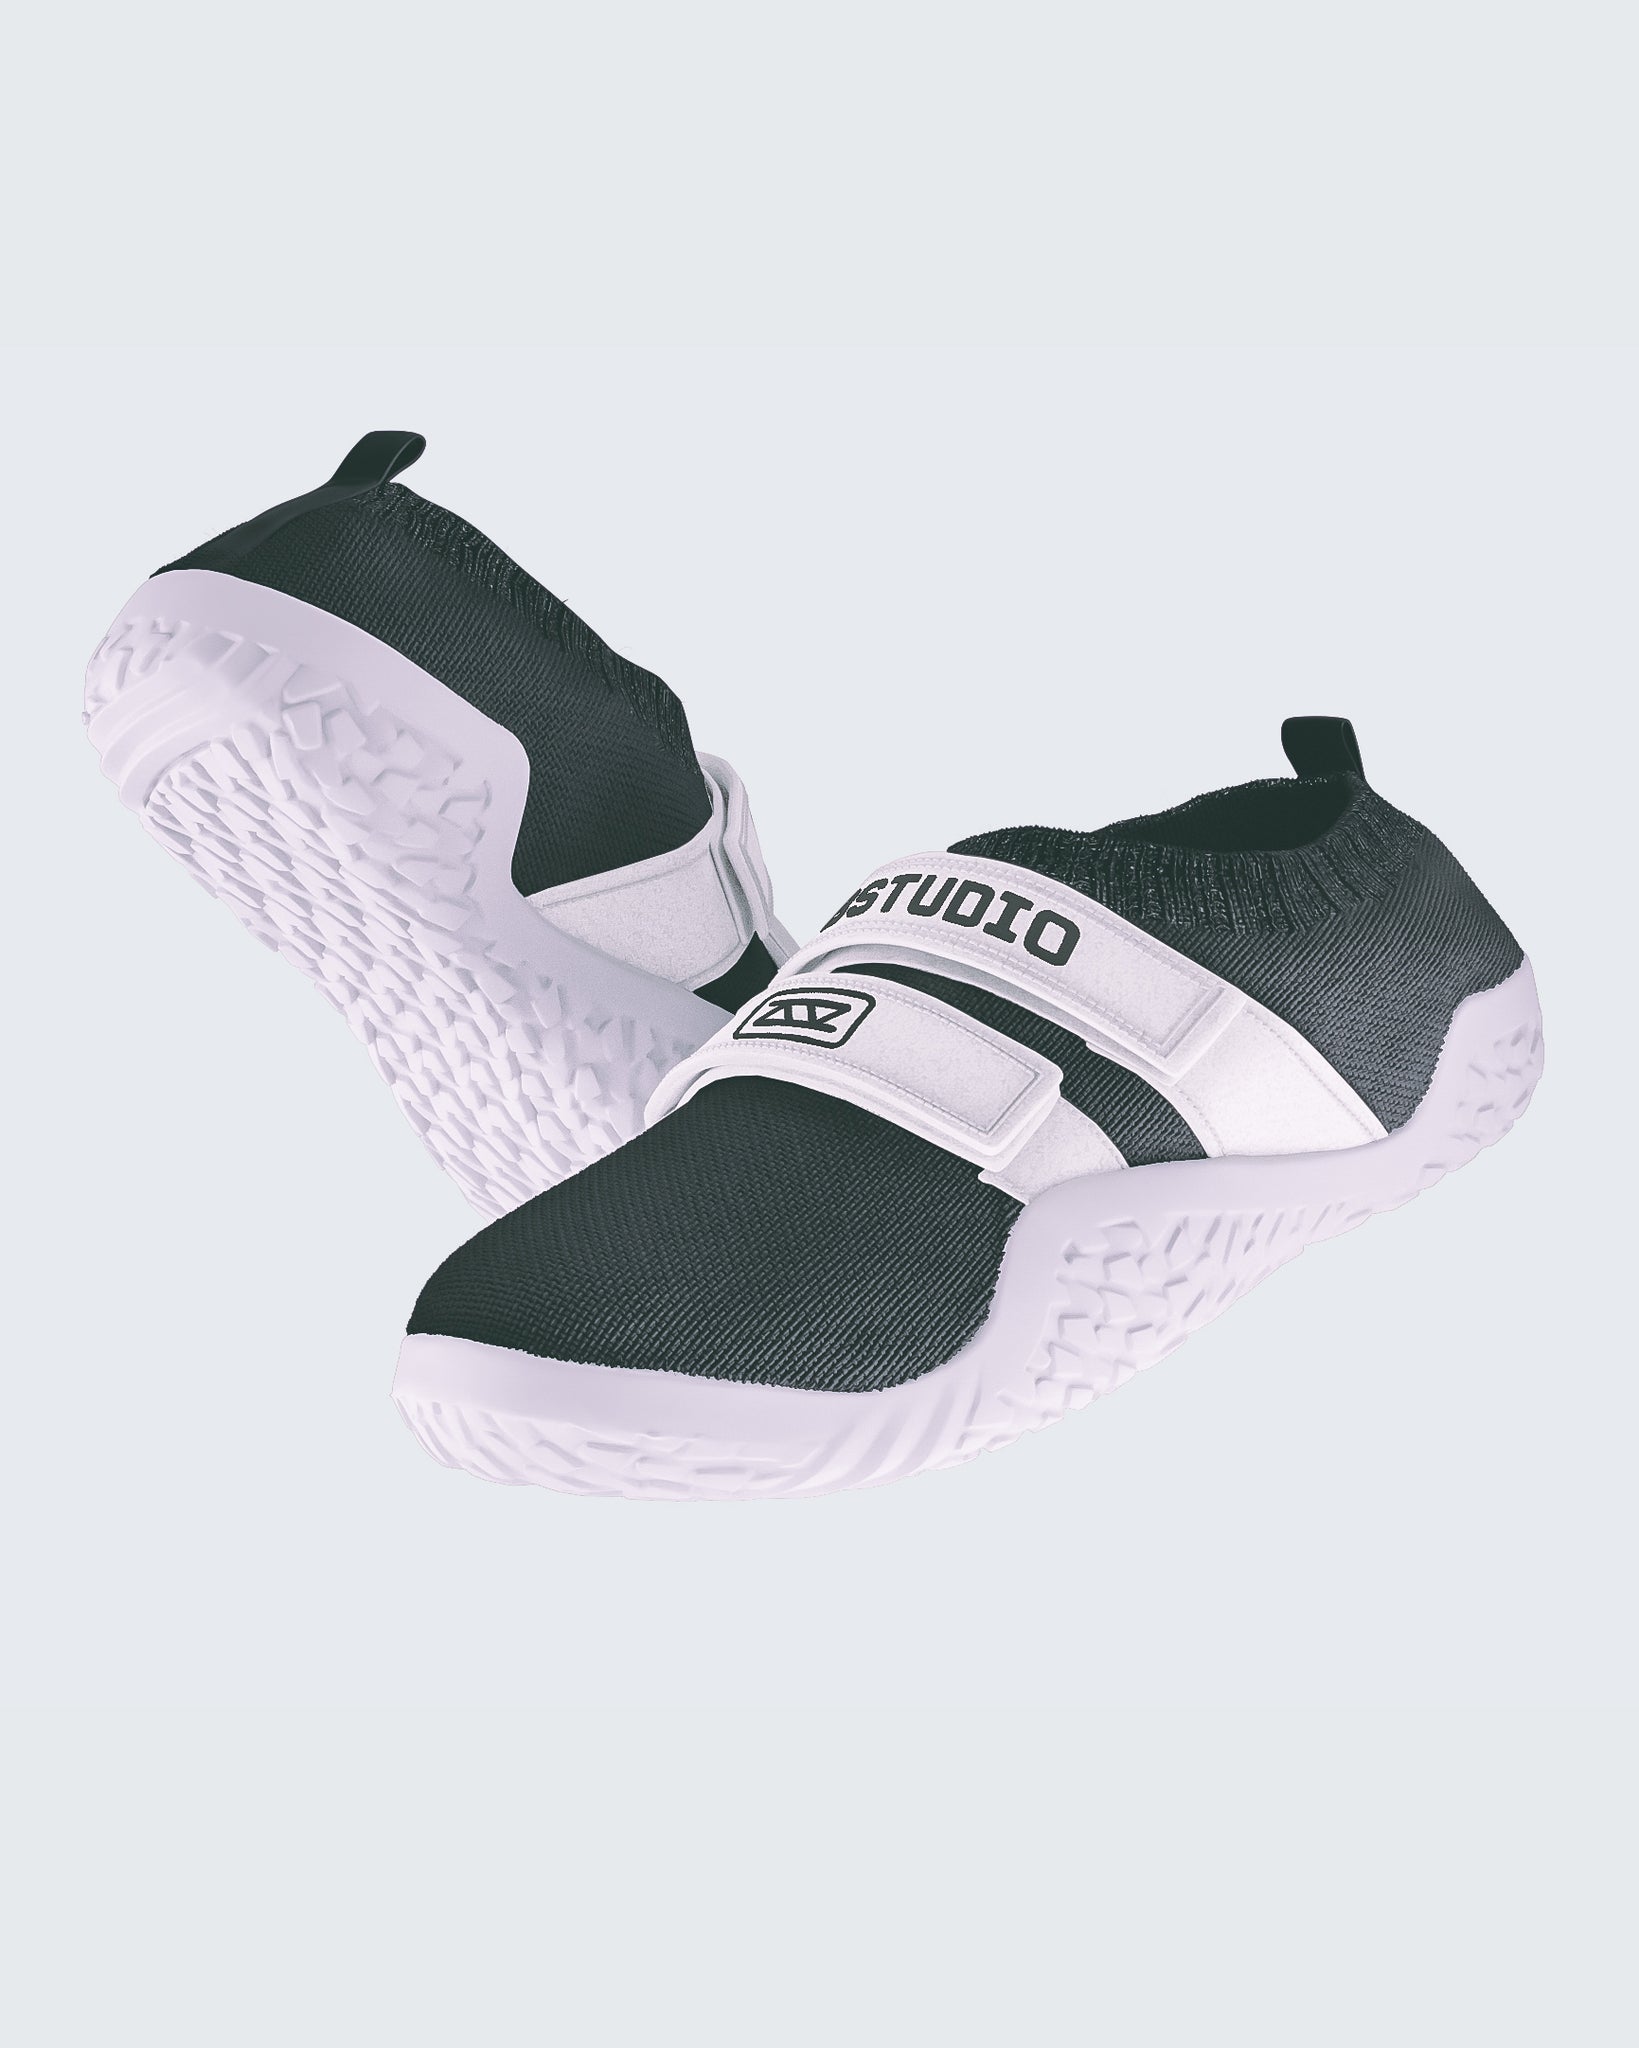 Pro Slippers - Black and White